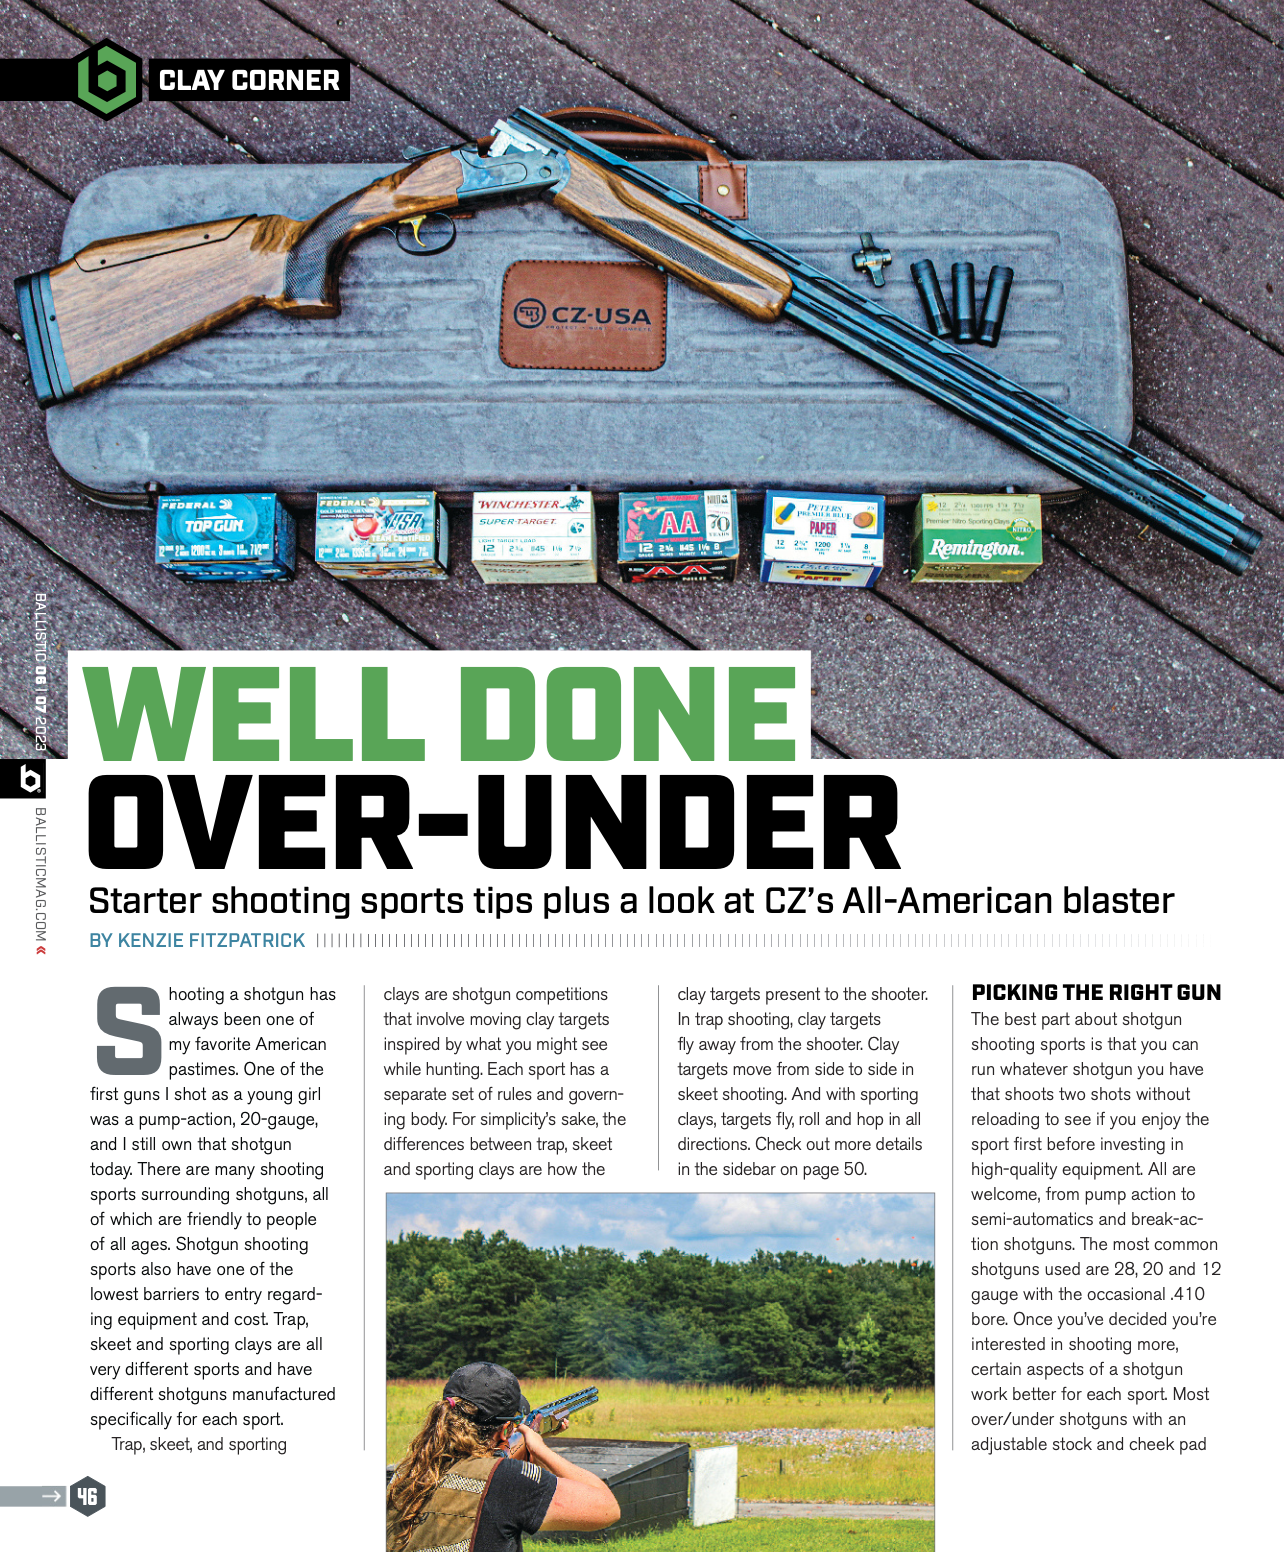 Well Done Over-Under: Starter shooting sports tips plus a look at CZ’s All-American Blaster